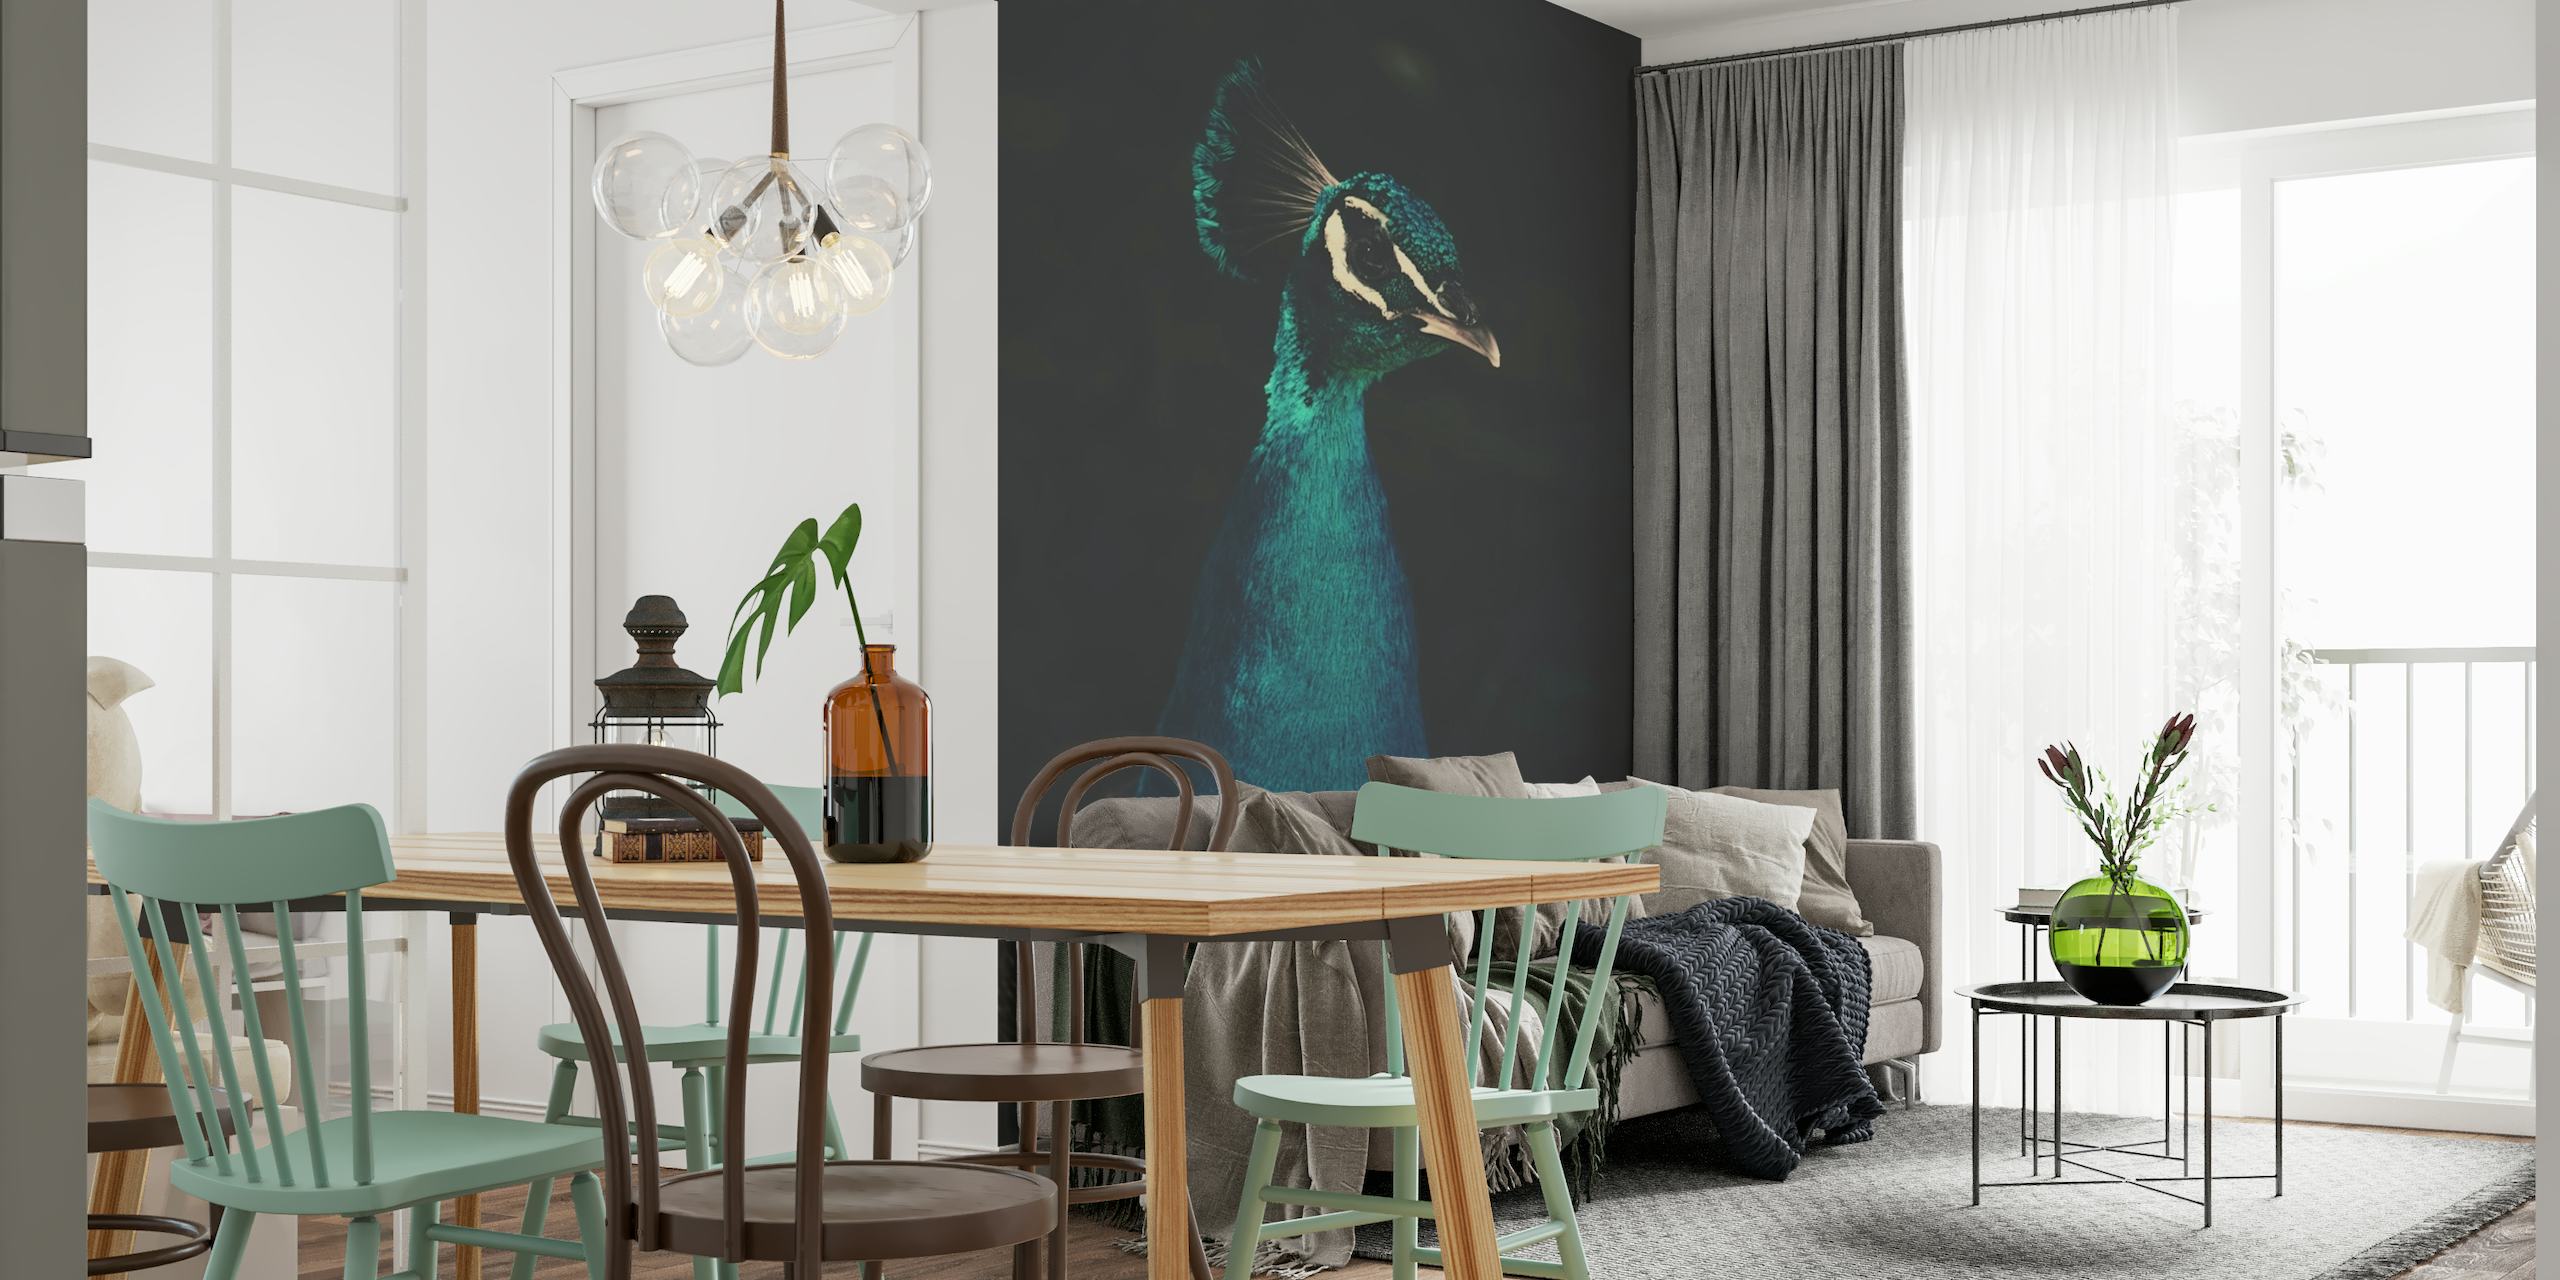 Elegant peacock wall mural with vibrant turquoise and emerald feathers